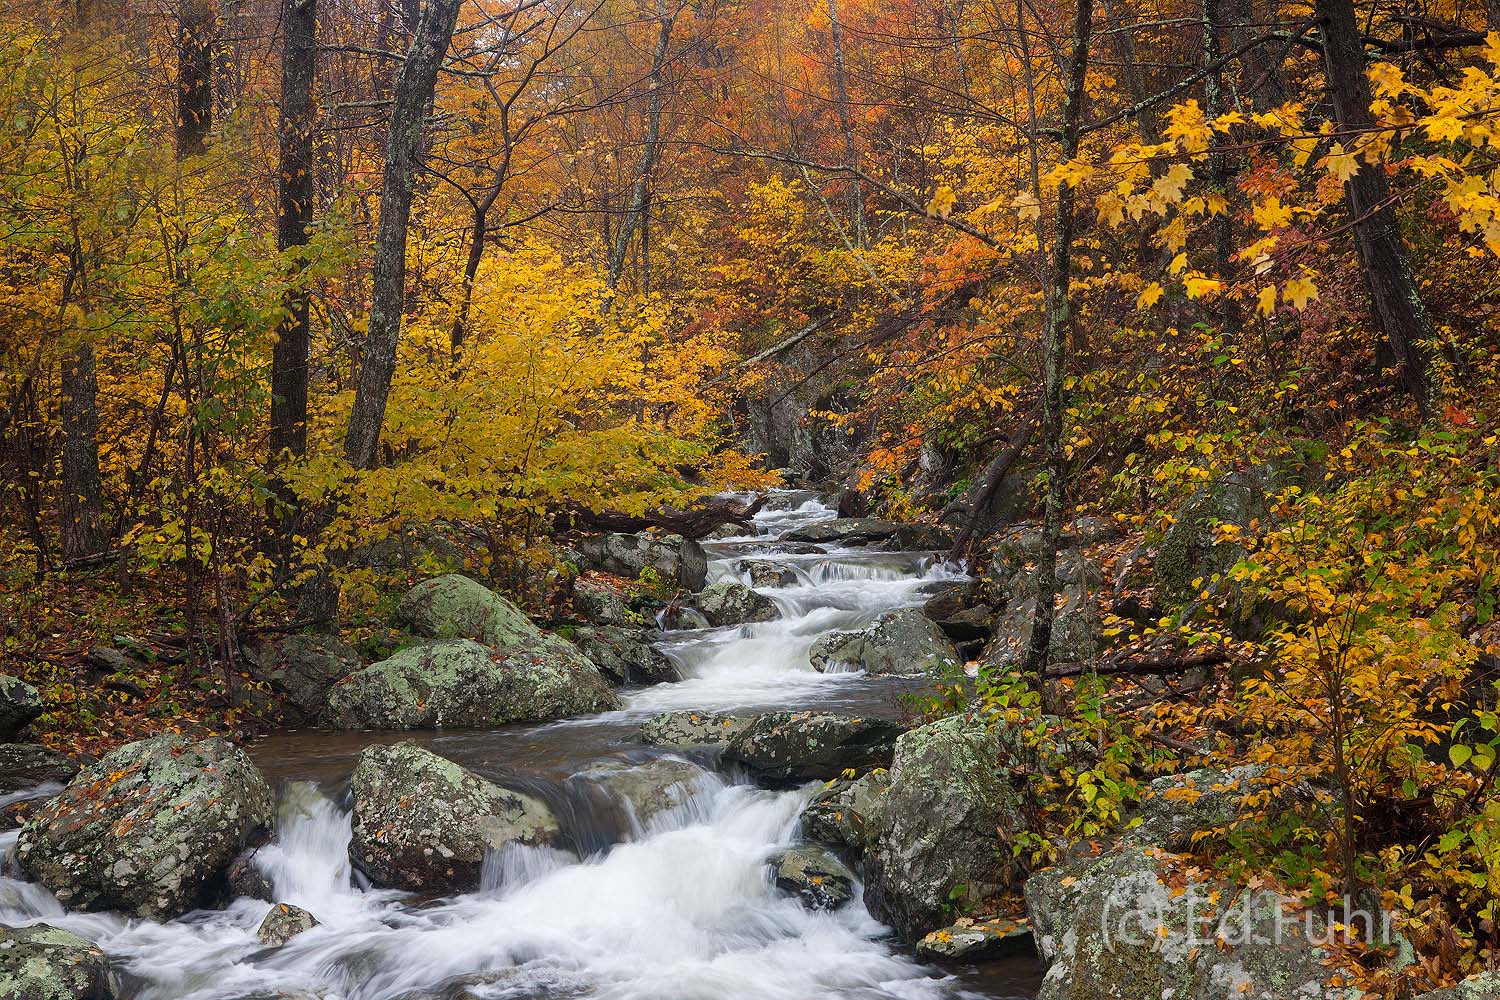 One of my my popular photographs, Whiteoak Fall, features a rushing cascade of high water and the rich autumn yellows of witch...